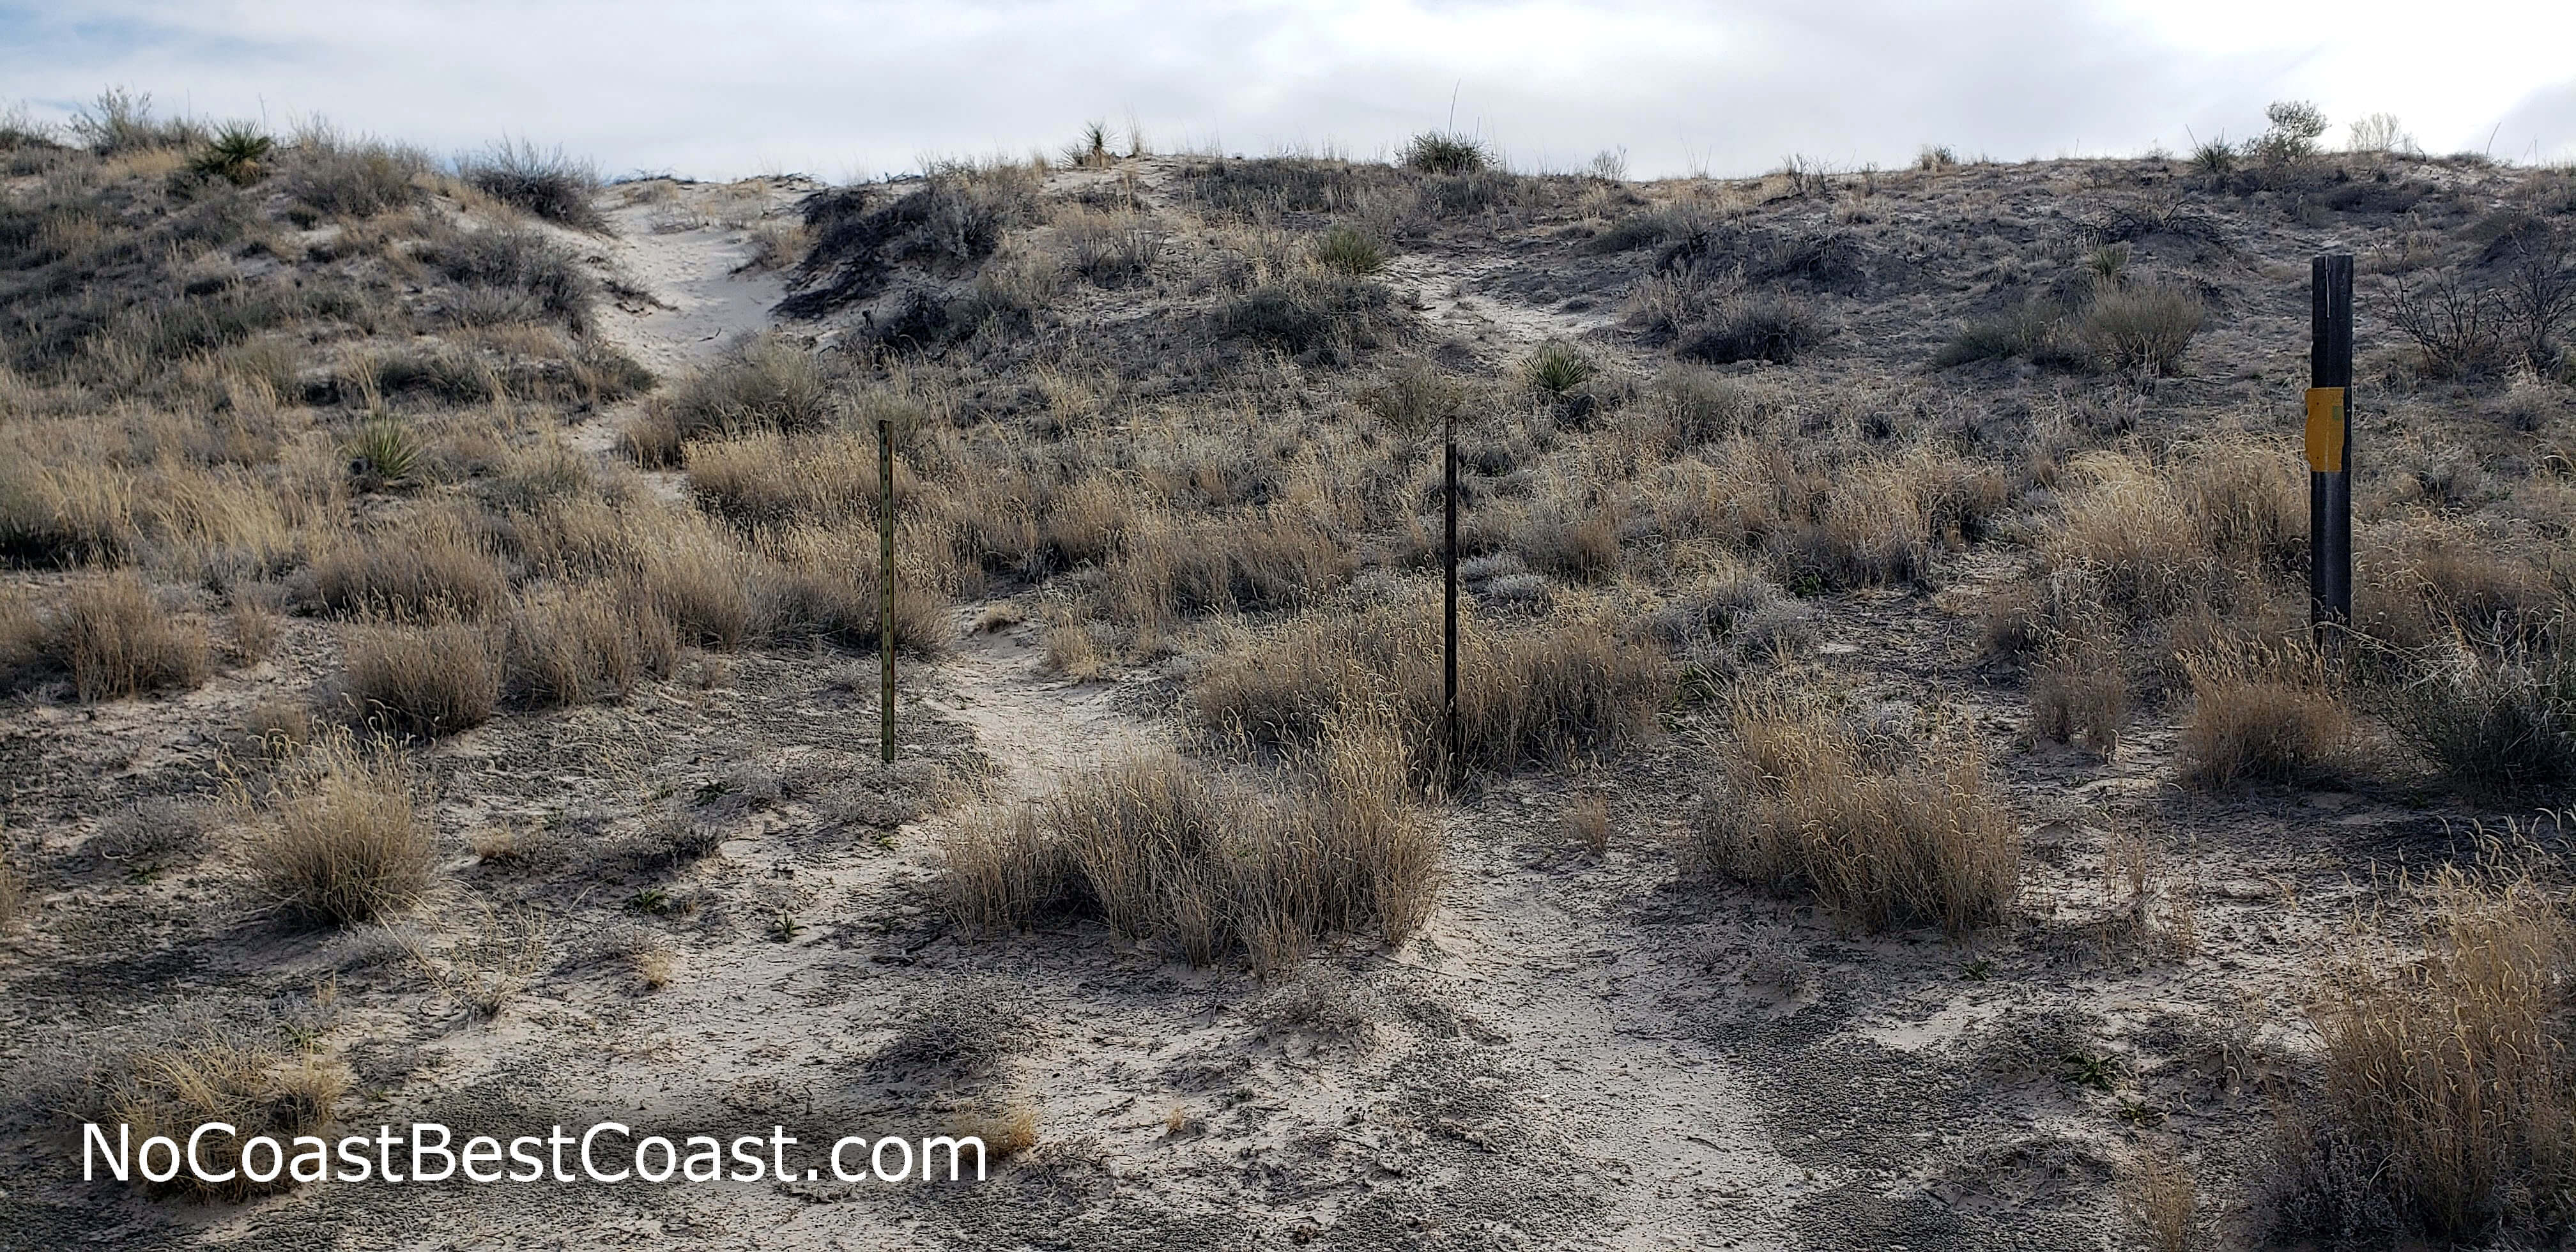 These poles indicate the route to the dunes